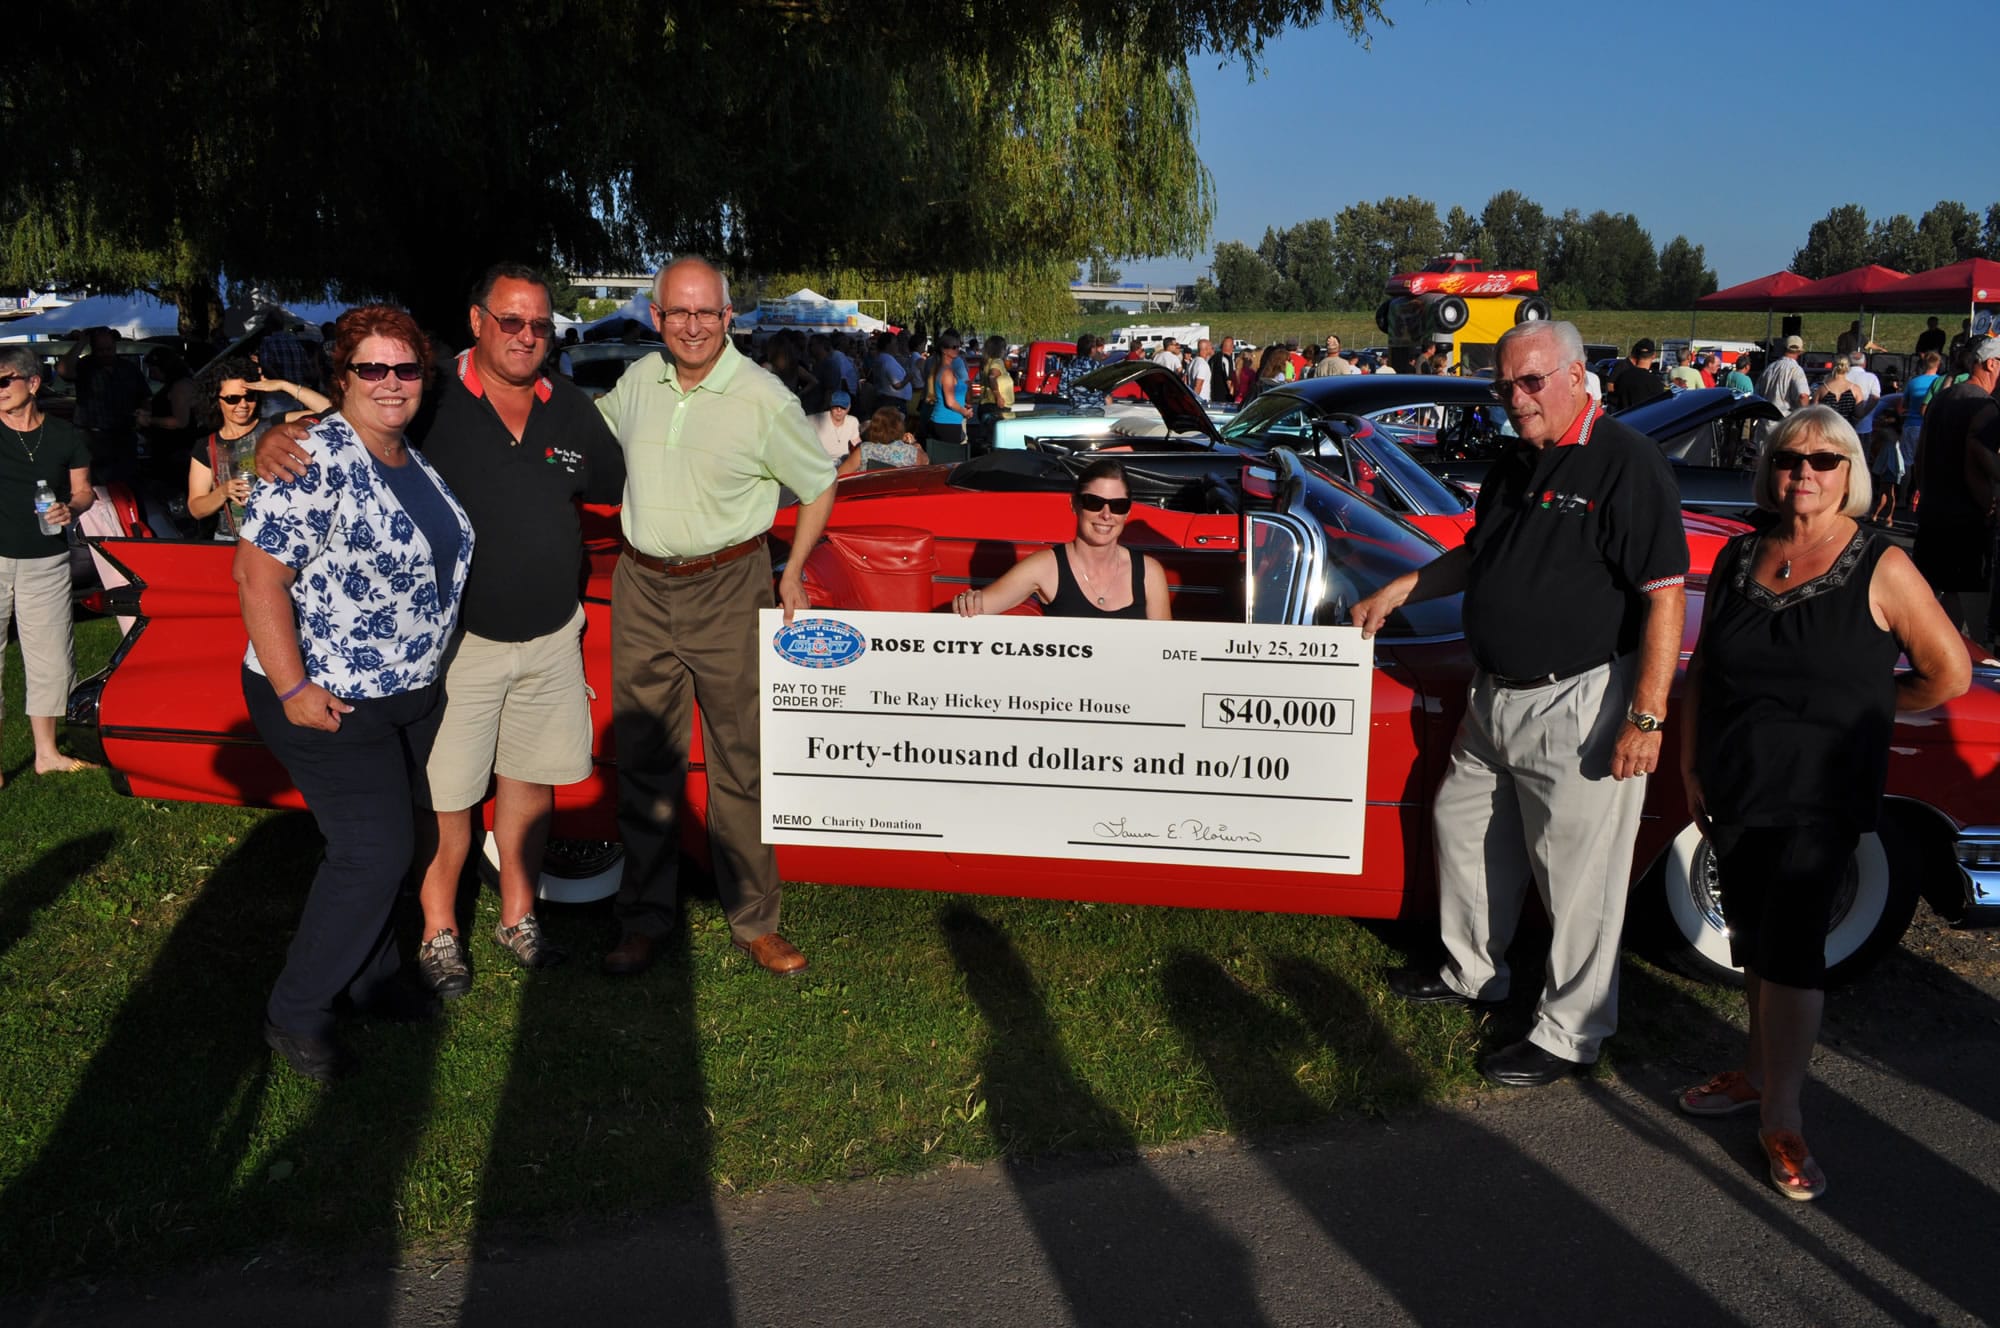 Woodland: Rose City Classics presented $40,000 to the Ray Hickey Hospice House, a program of PeaceHealth Southwest Medical Center, on July 25. Most of the money was raised at the Woodland Planters Days Cruise In in June.